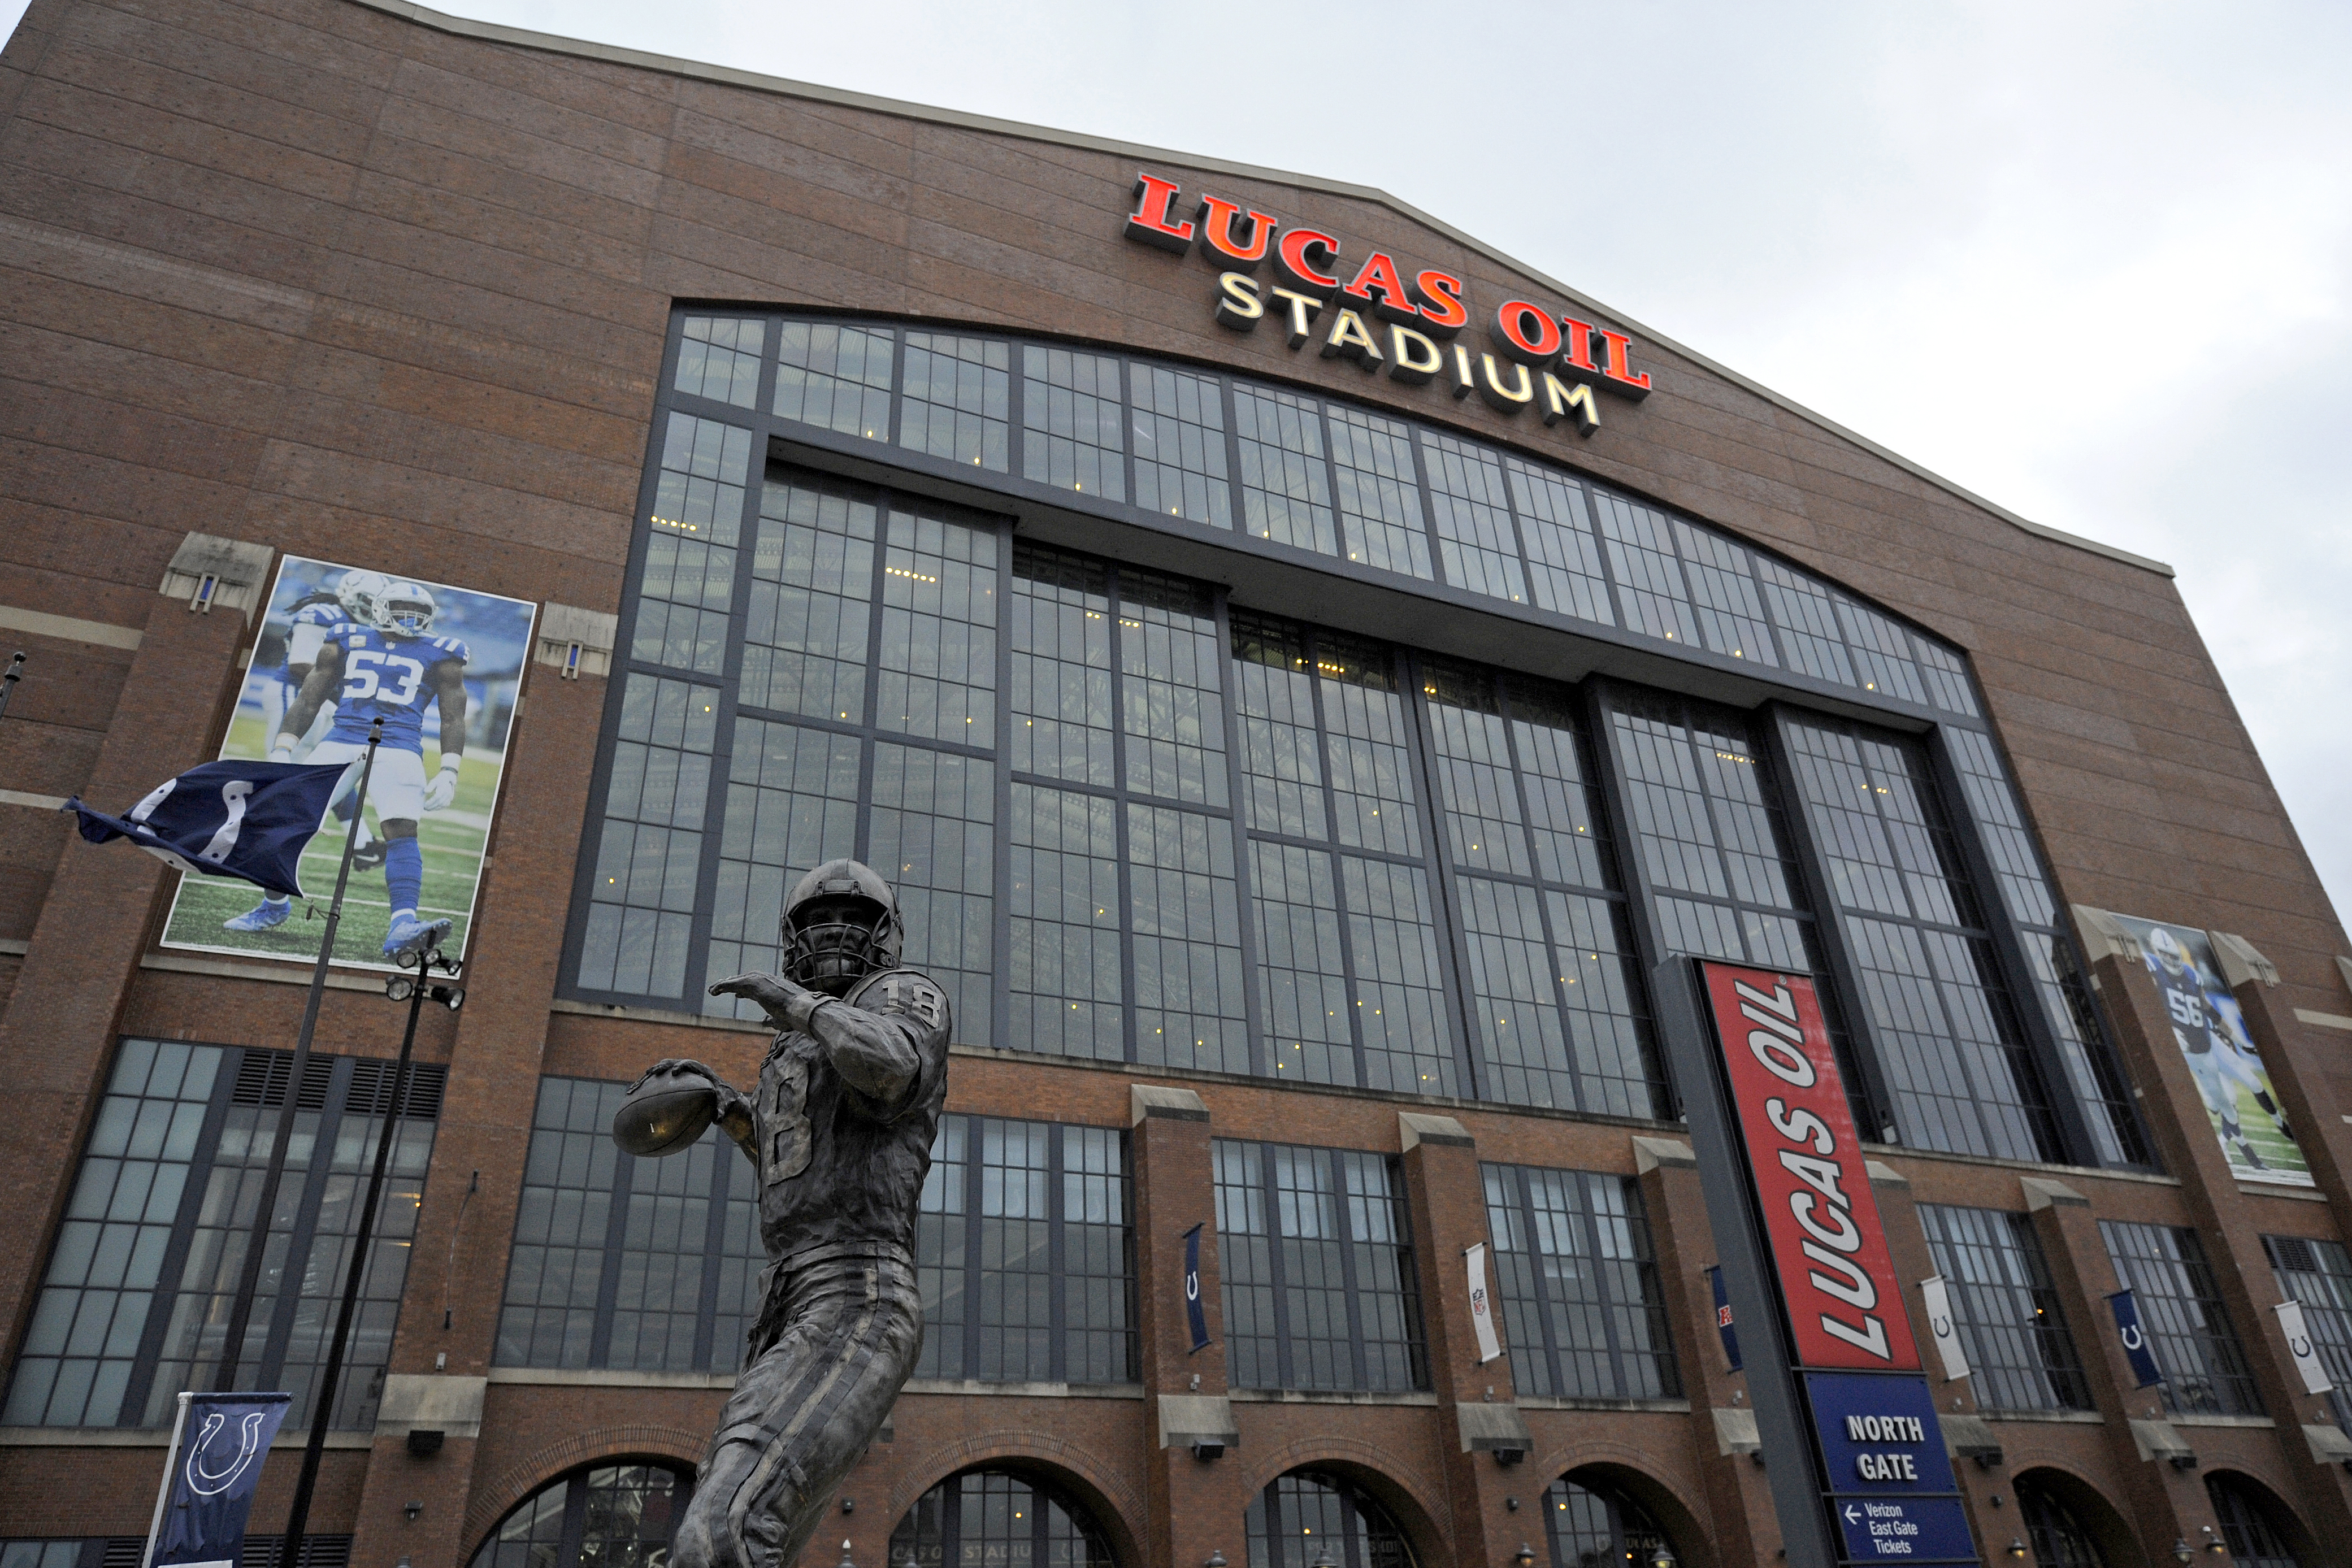 A statue of Peyton Manning stands outside of the stadium before the start of the NFL football game between the New England Patriots and the Indianapolis Colts on December 18, 2021, at Lucas Oil Stadium in Indianapolis, Indiana.